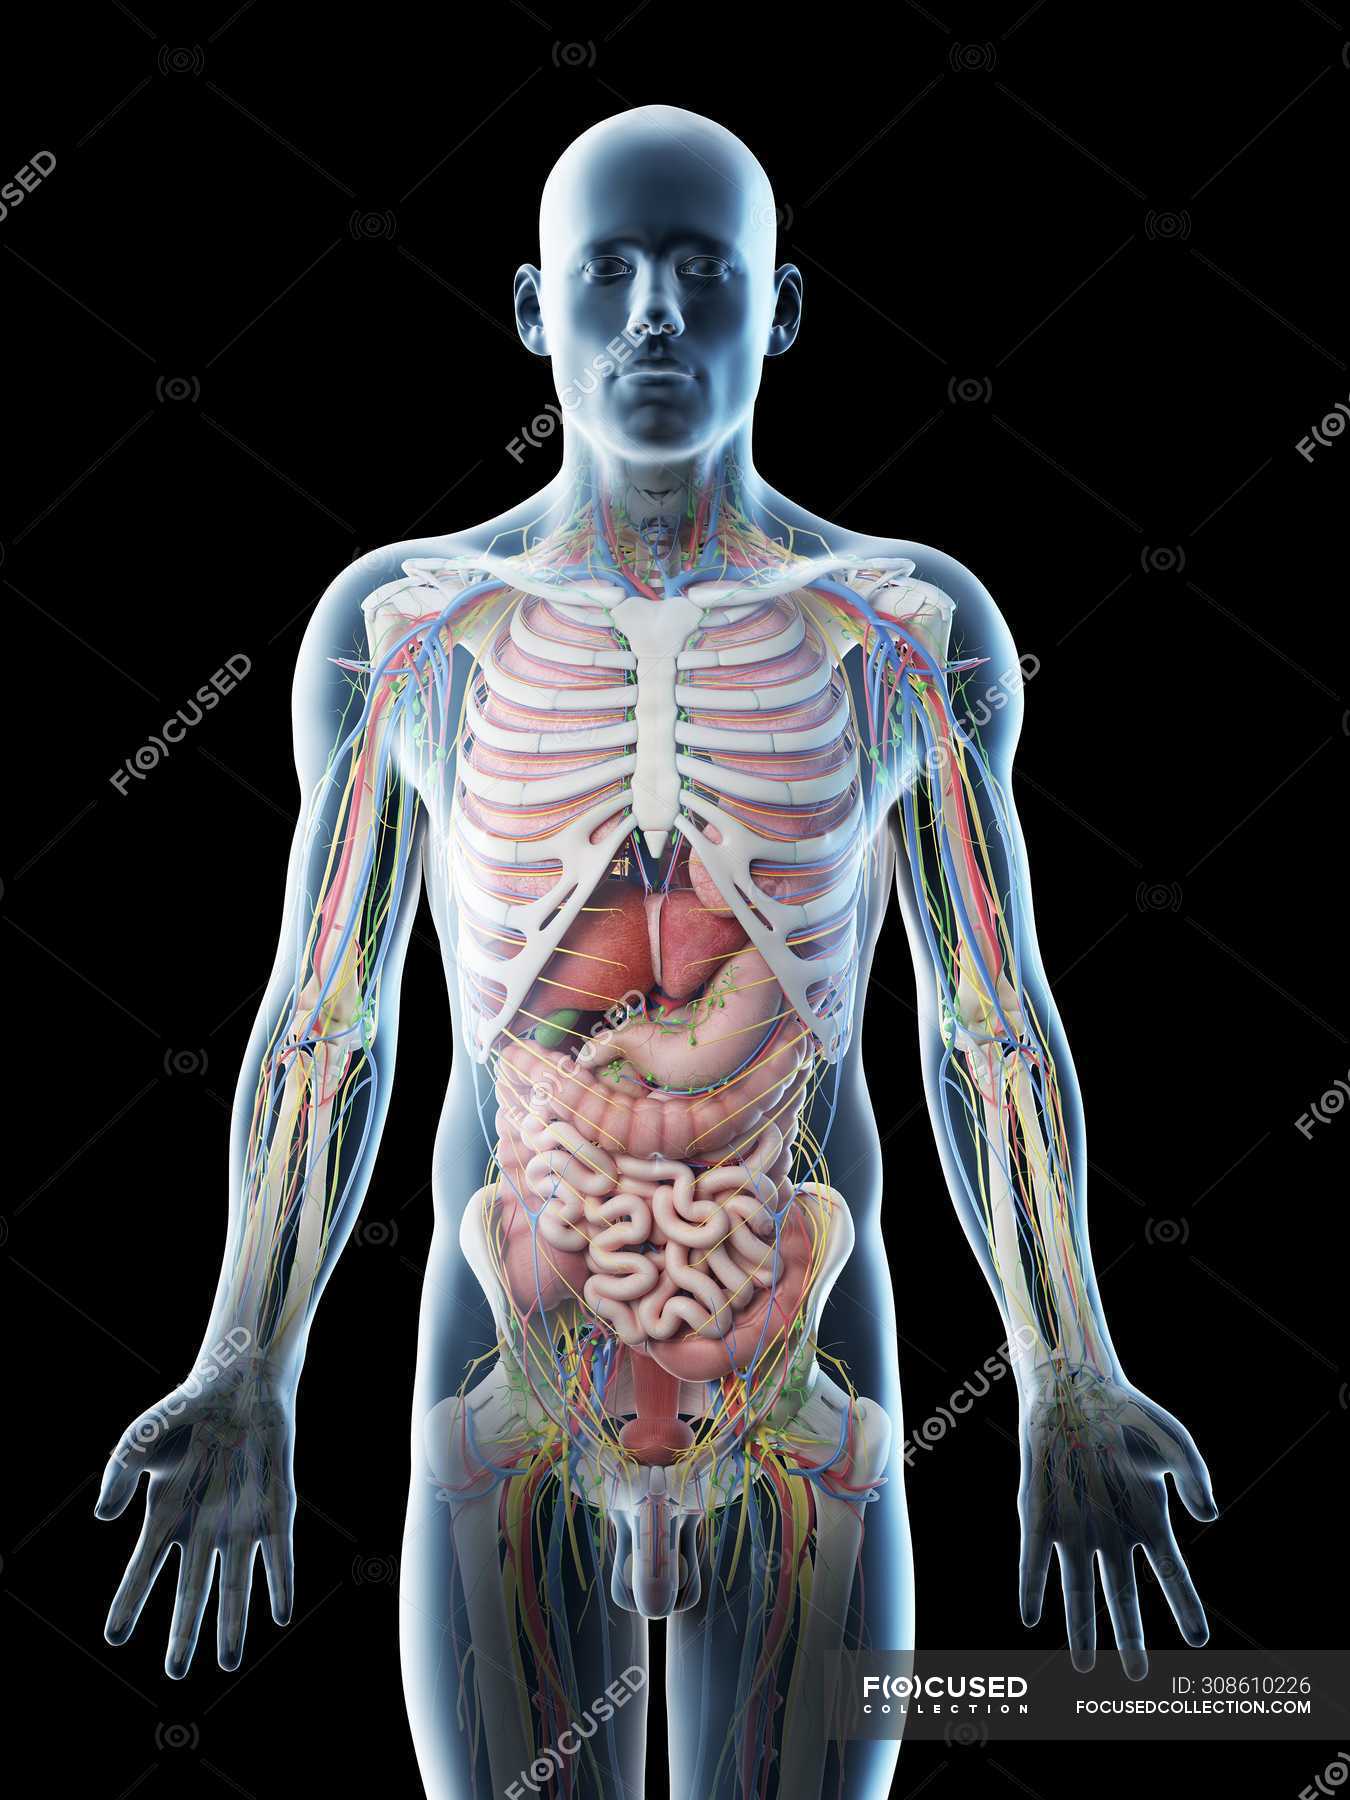 Male upper body anatomy and internal organs, computer illustration